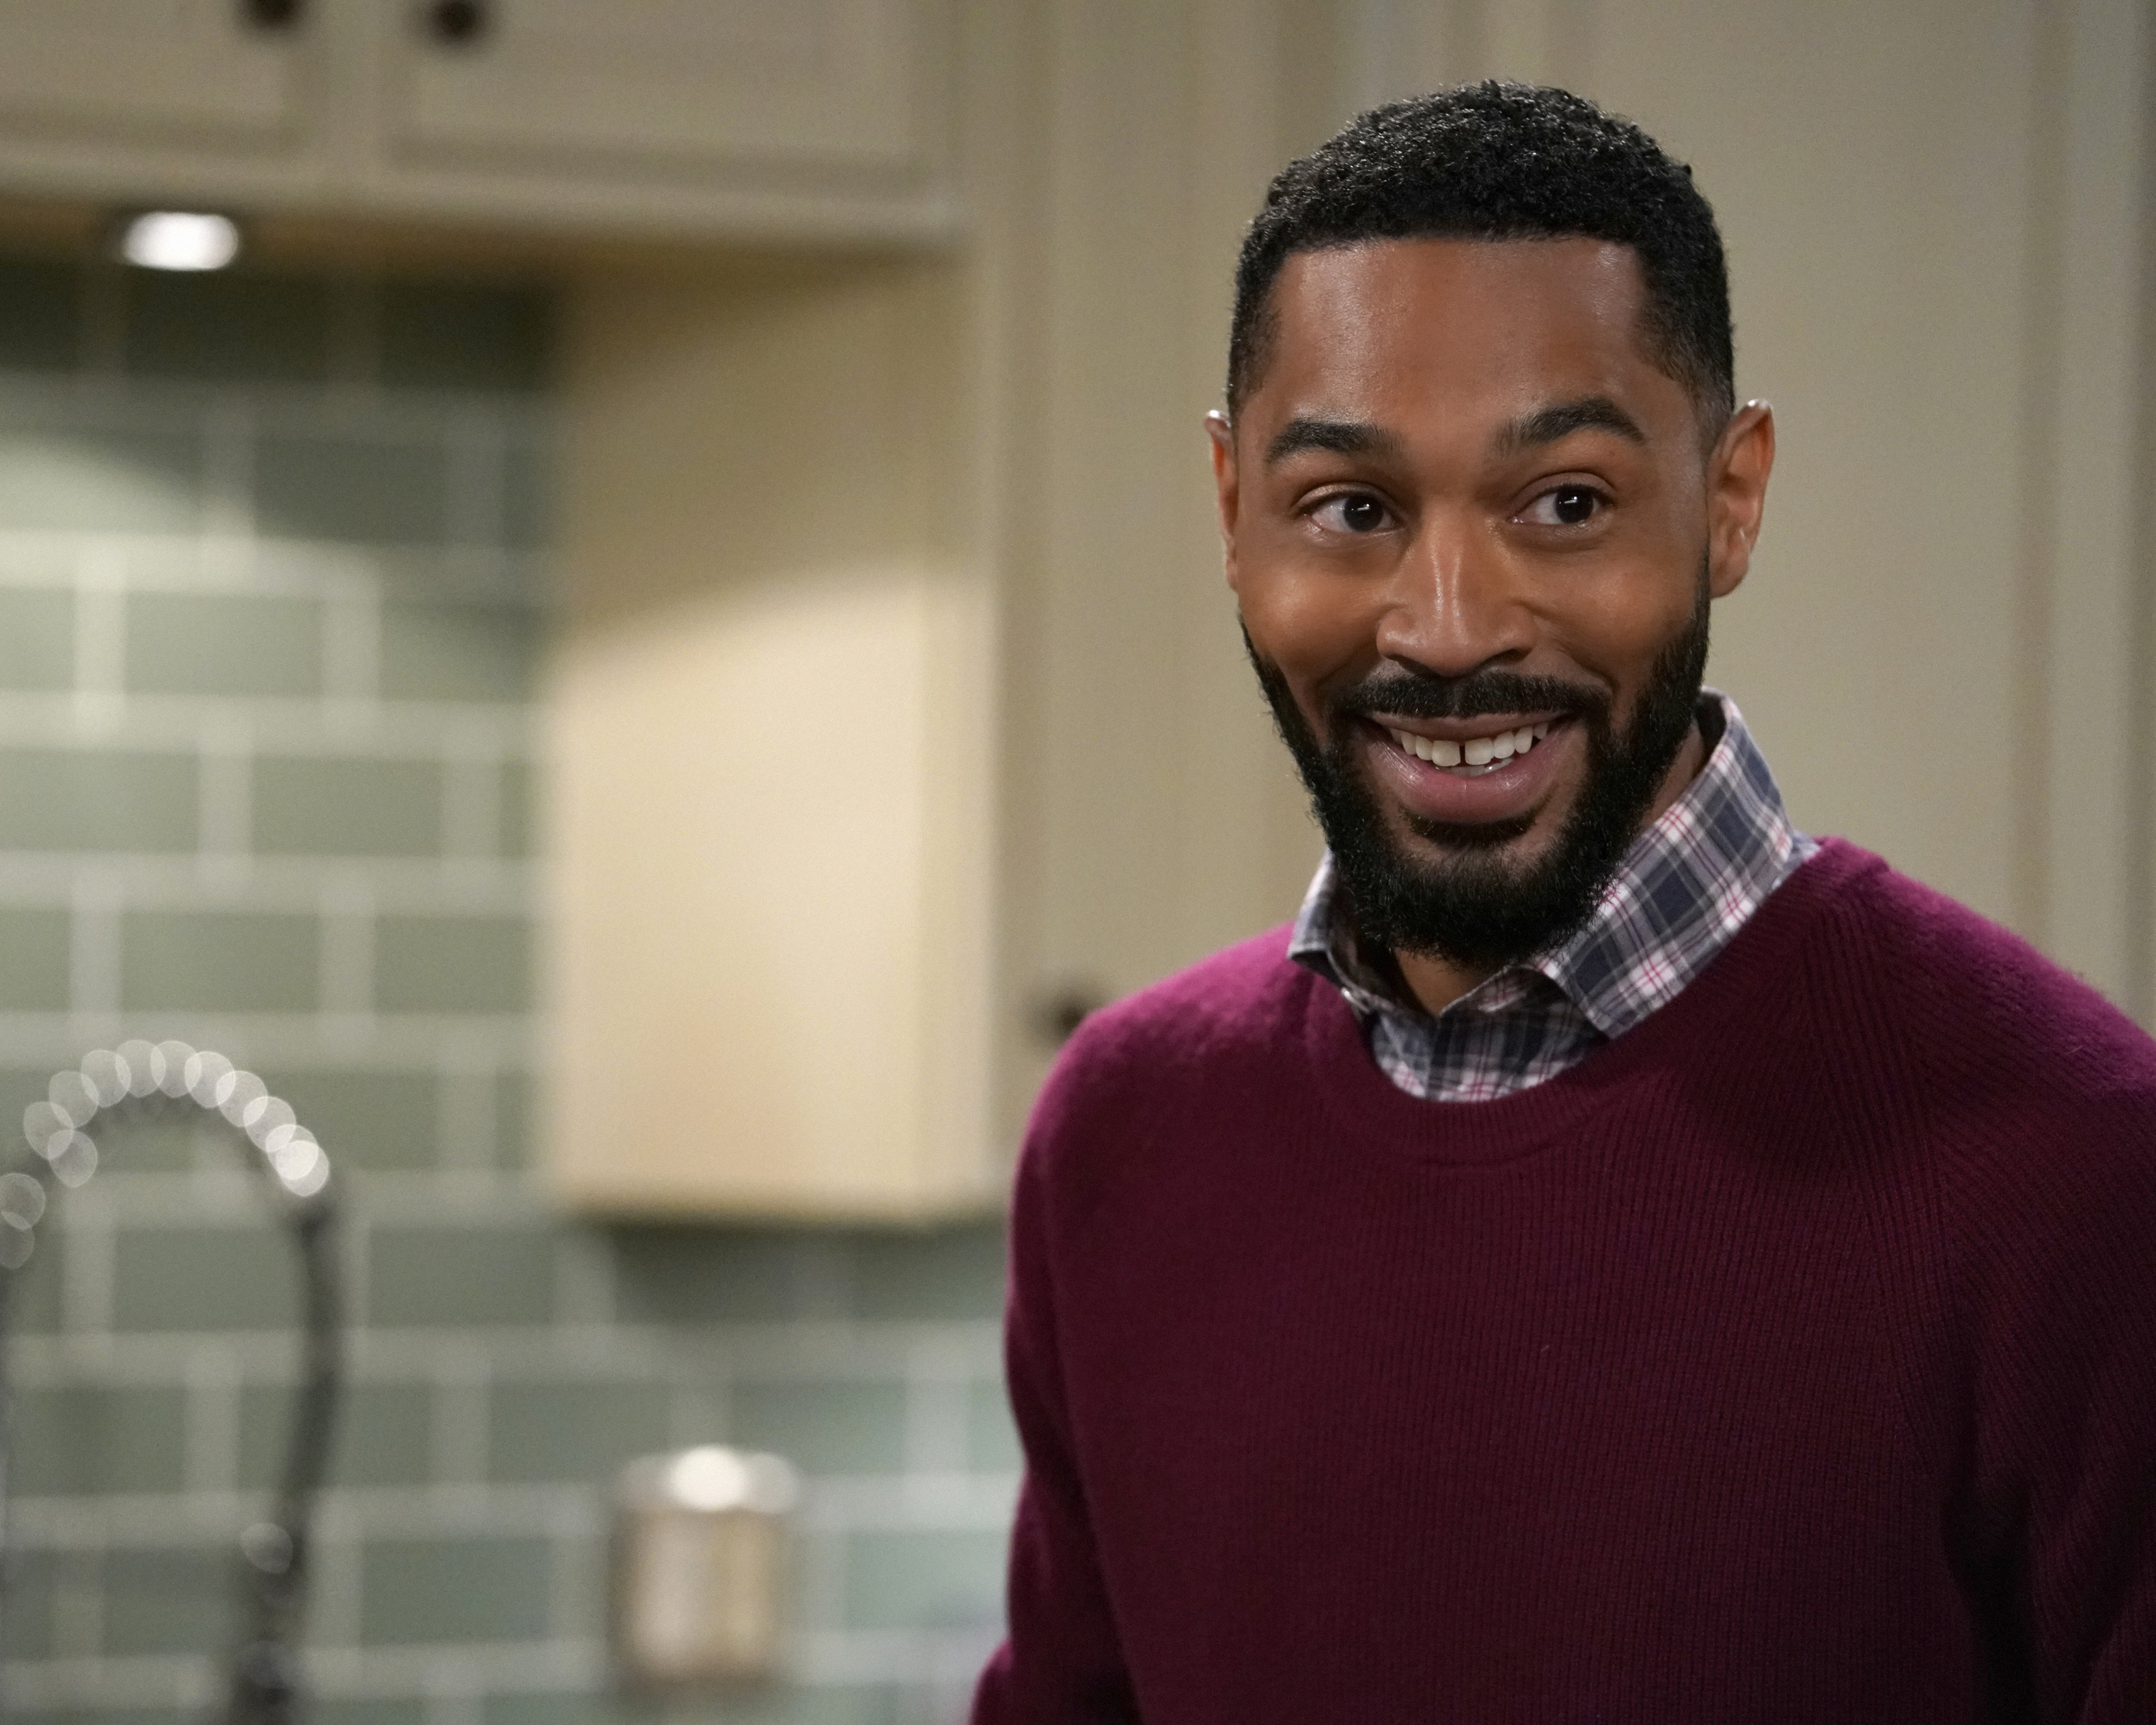 Tone Bell as Nick in "Fam." | Source: Getty Images